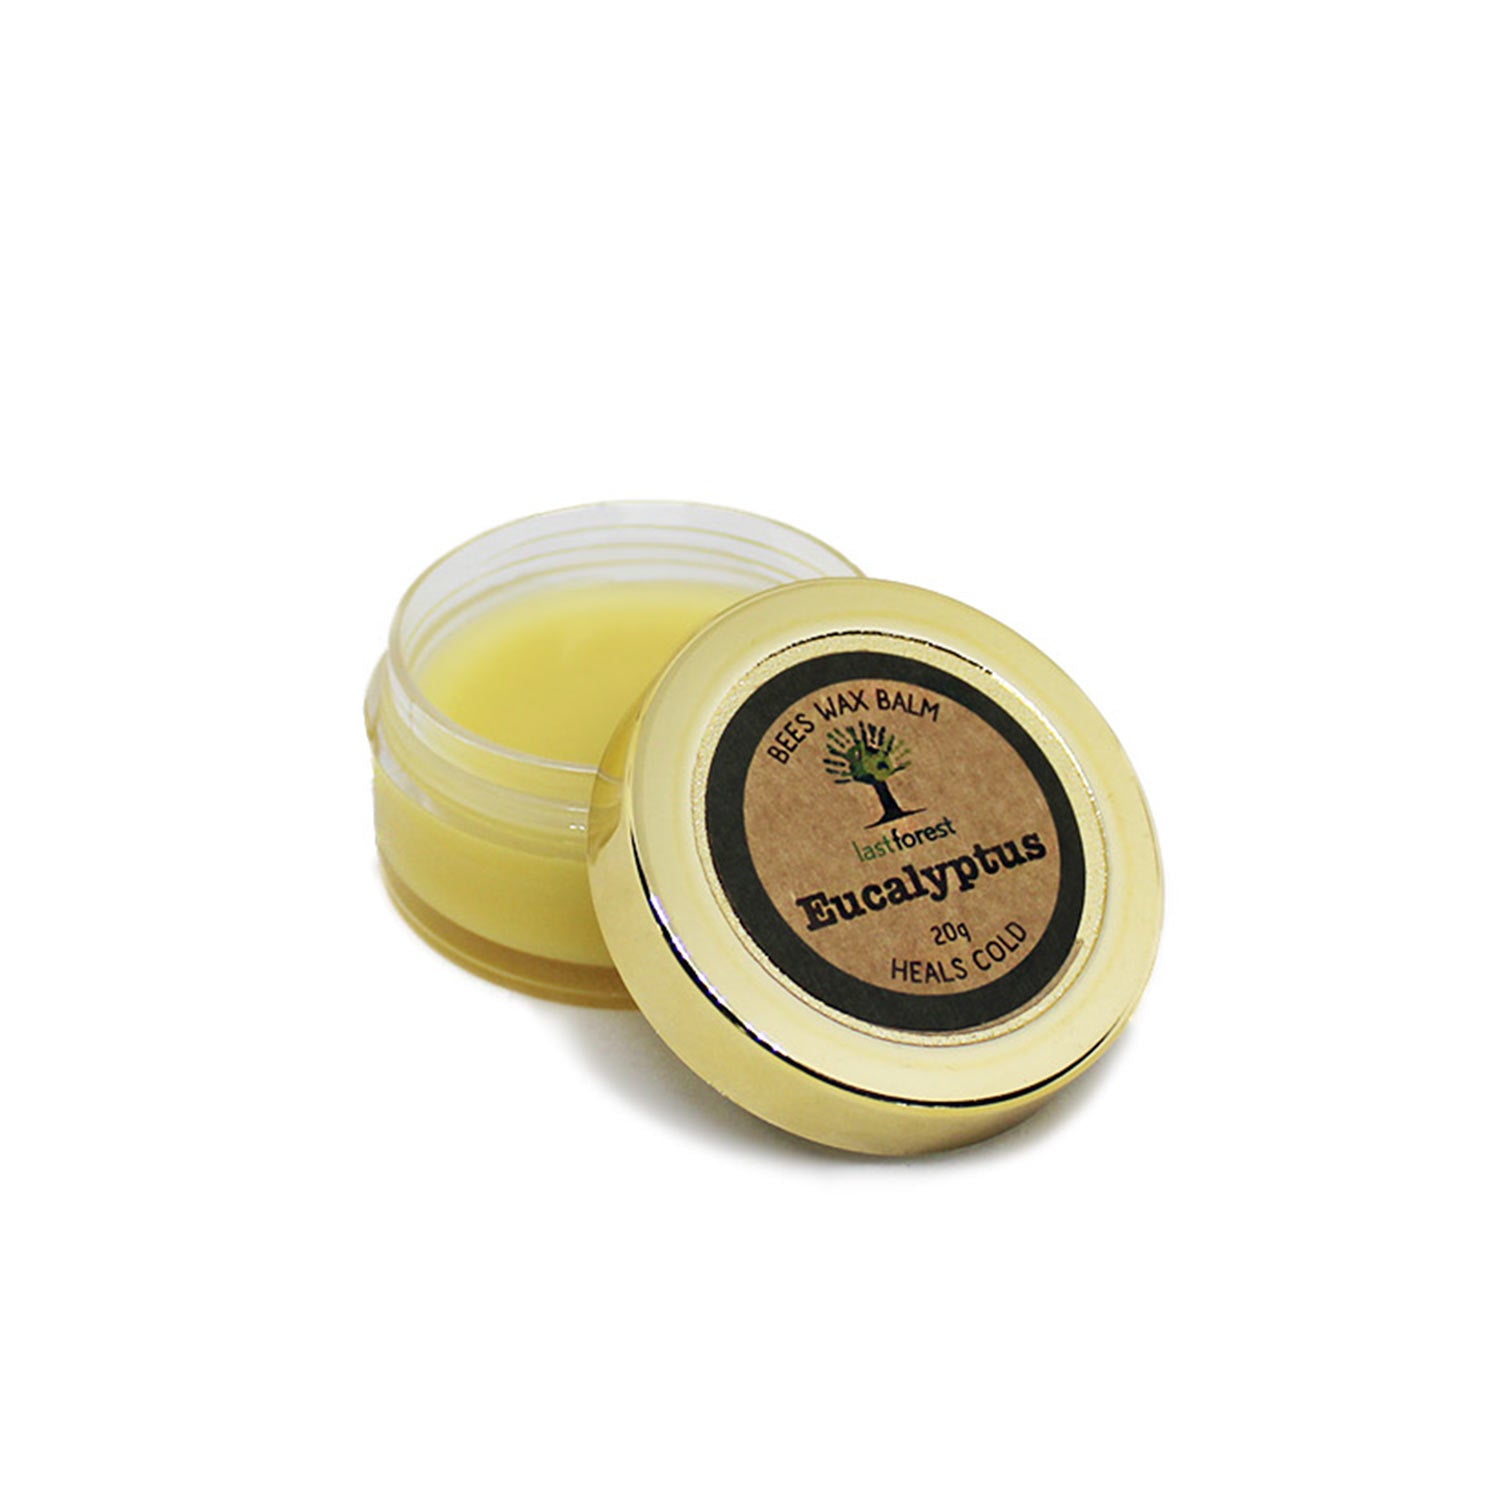 Eucalyptus Balm for Cold and Clogged Nose- 20g